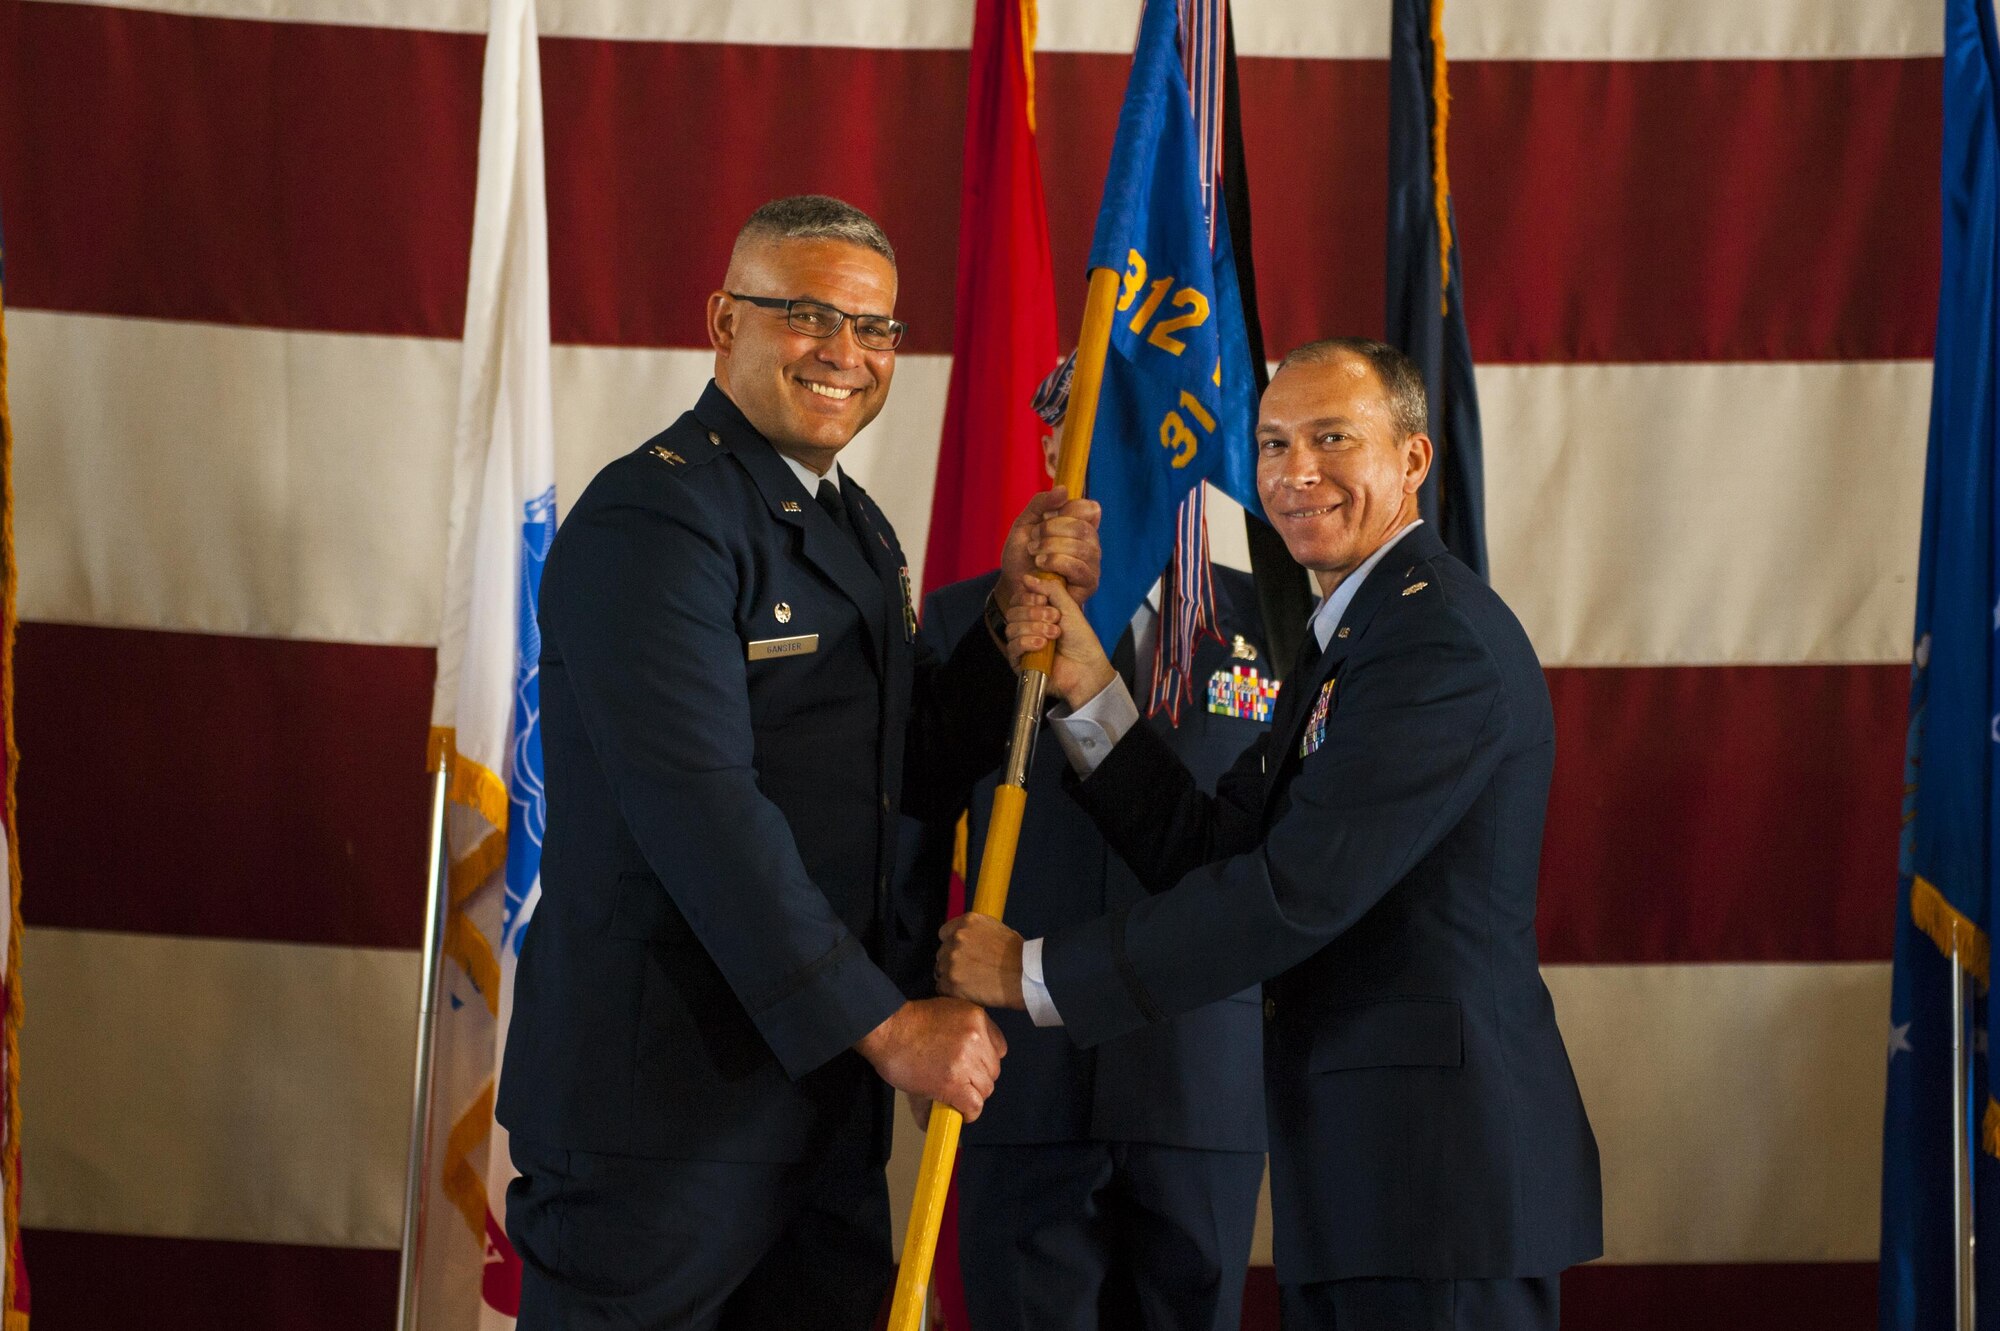 U.S. Air Force Lt. Col. Scott D. Cline, 312th Training Squadron Commander, receives the unit guideon from Col. Alejandro Ganster, 17th Training Group Commander, during the 312th TRS change of command at the Louis F. Garland Department of Defense Fire Academy High Bay Fire Academy high bay on Goodfellow Air Force Base, Texas, July 10, 2017. The change of command ceremony is a time honored military tradition that signifies the orderly transfer of authority. (U.S. Air Force photo by Senior Airman Scott Jackson/Released)